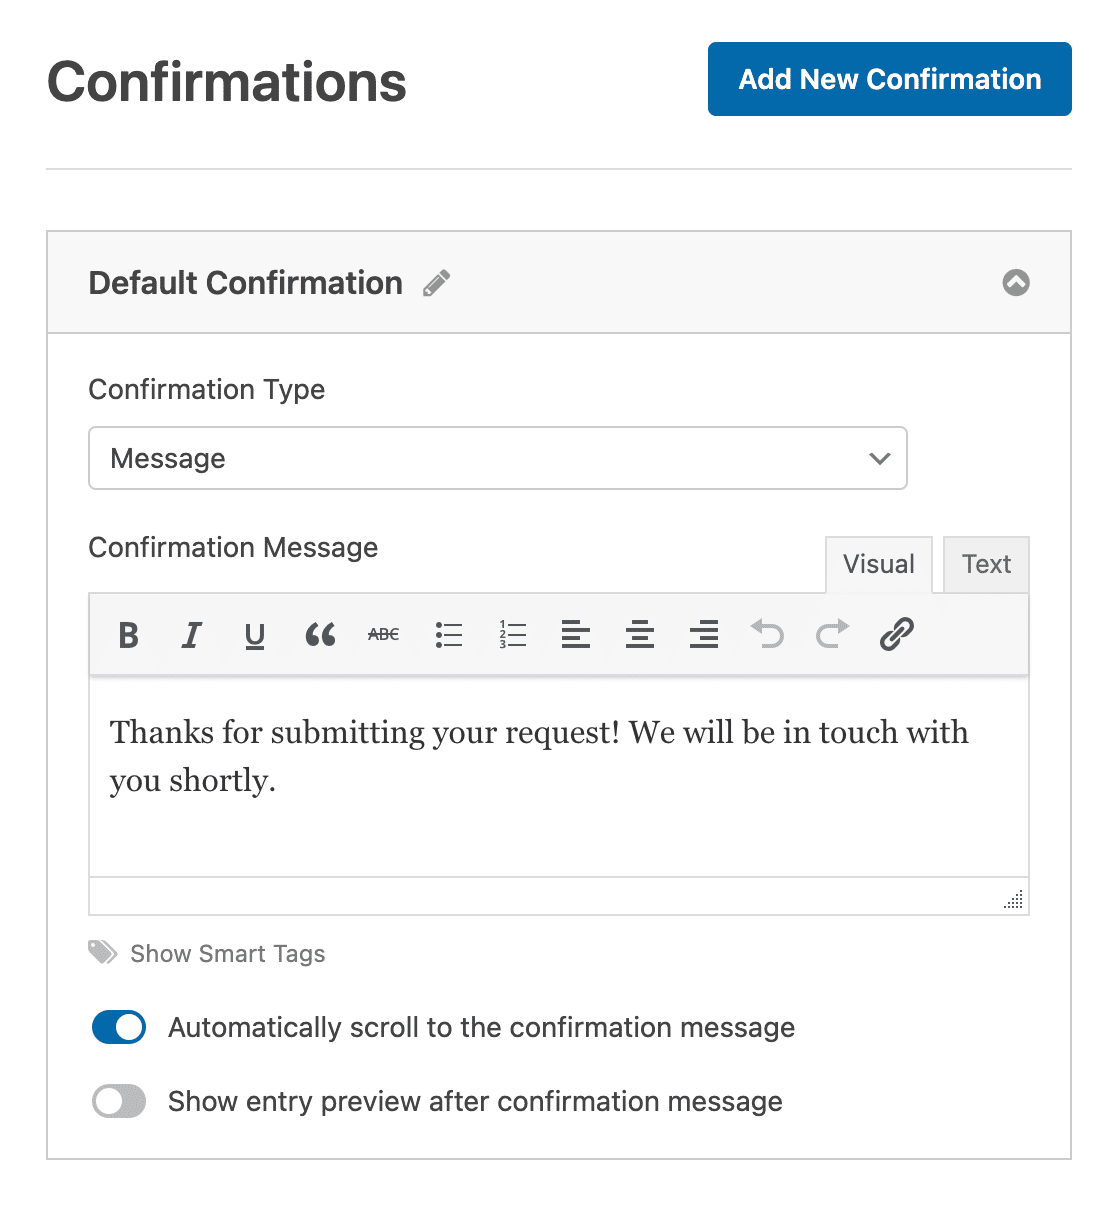 Customizing the confirmation message for a sponsorship request form